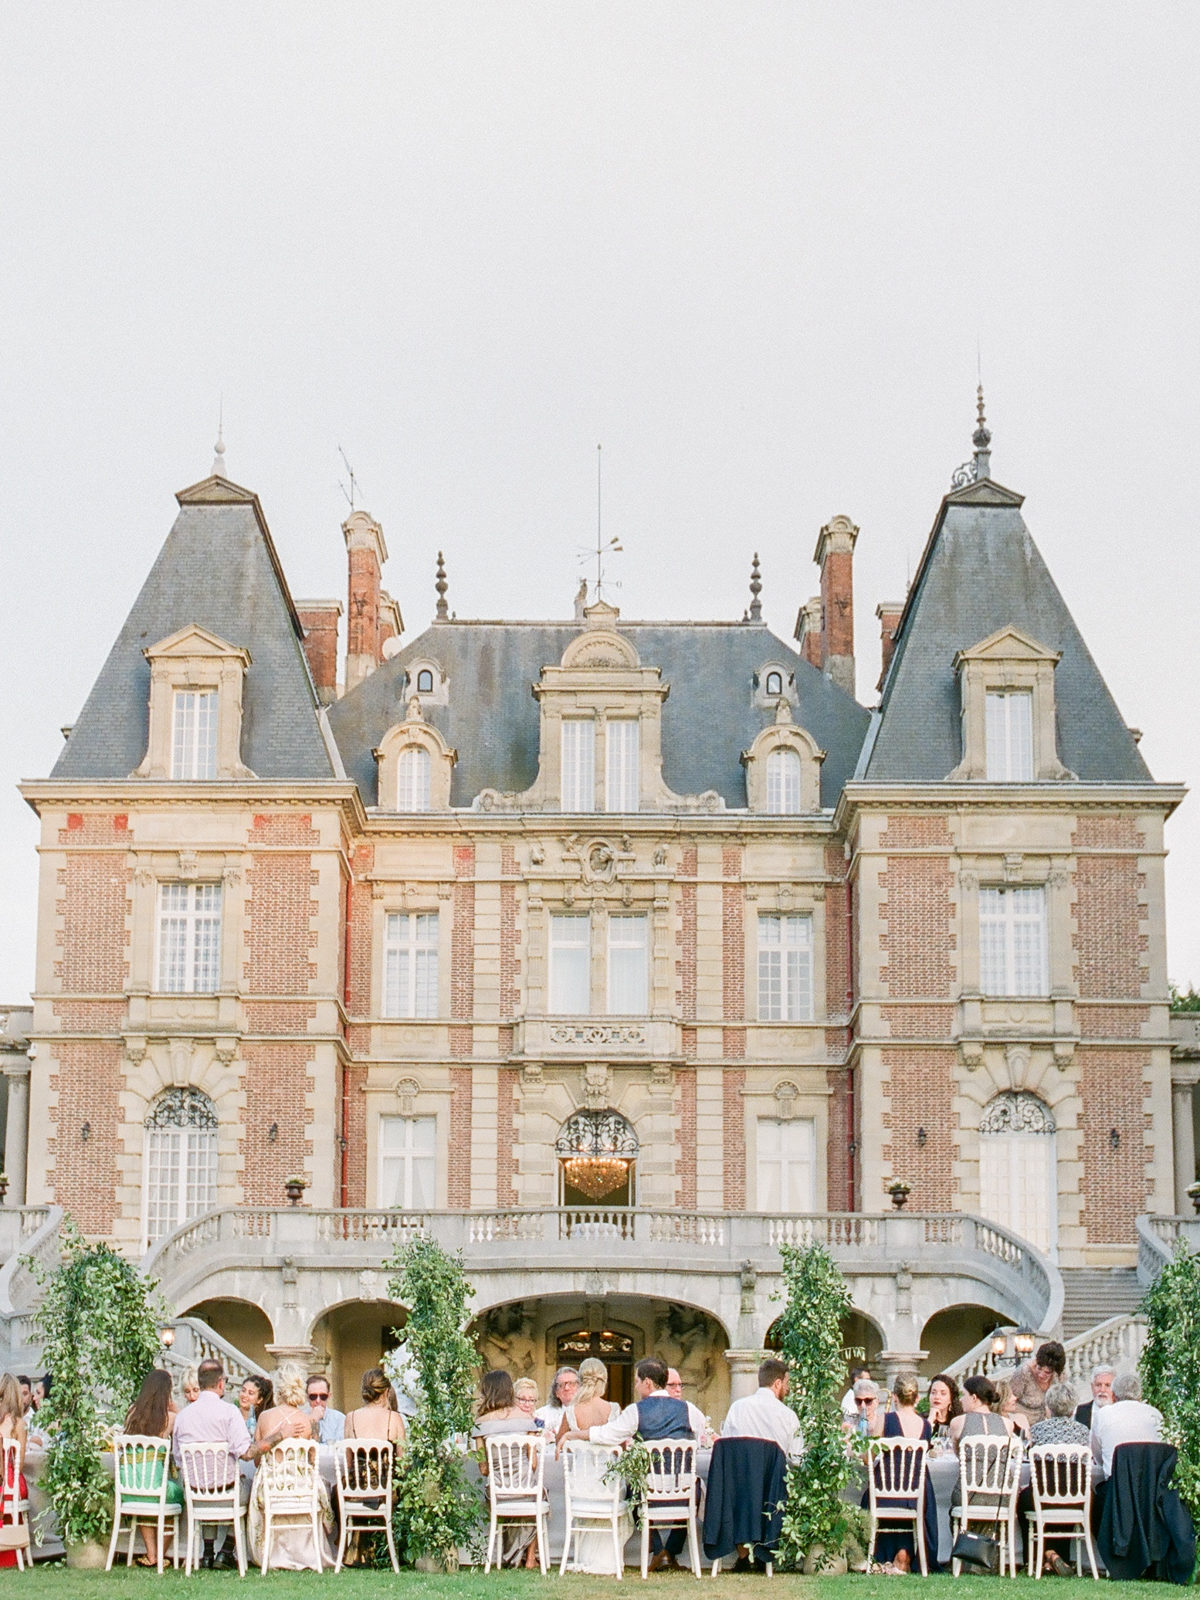 Europe Destination Wedding Guide | Luxury Destination Wedding Planning Advice | Molly Carr Photography | Chateau Bouffemont Paris France